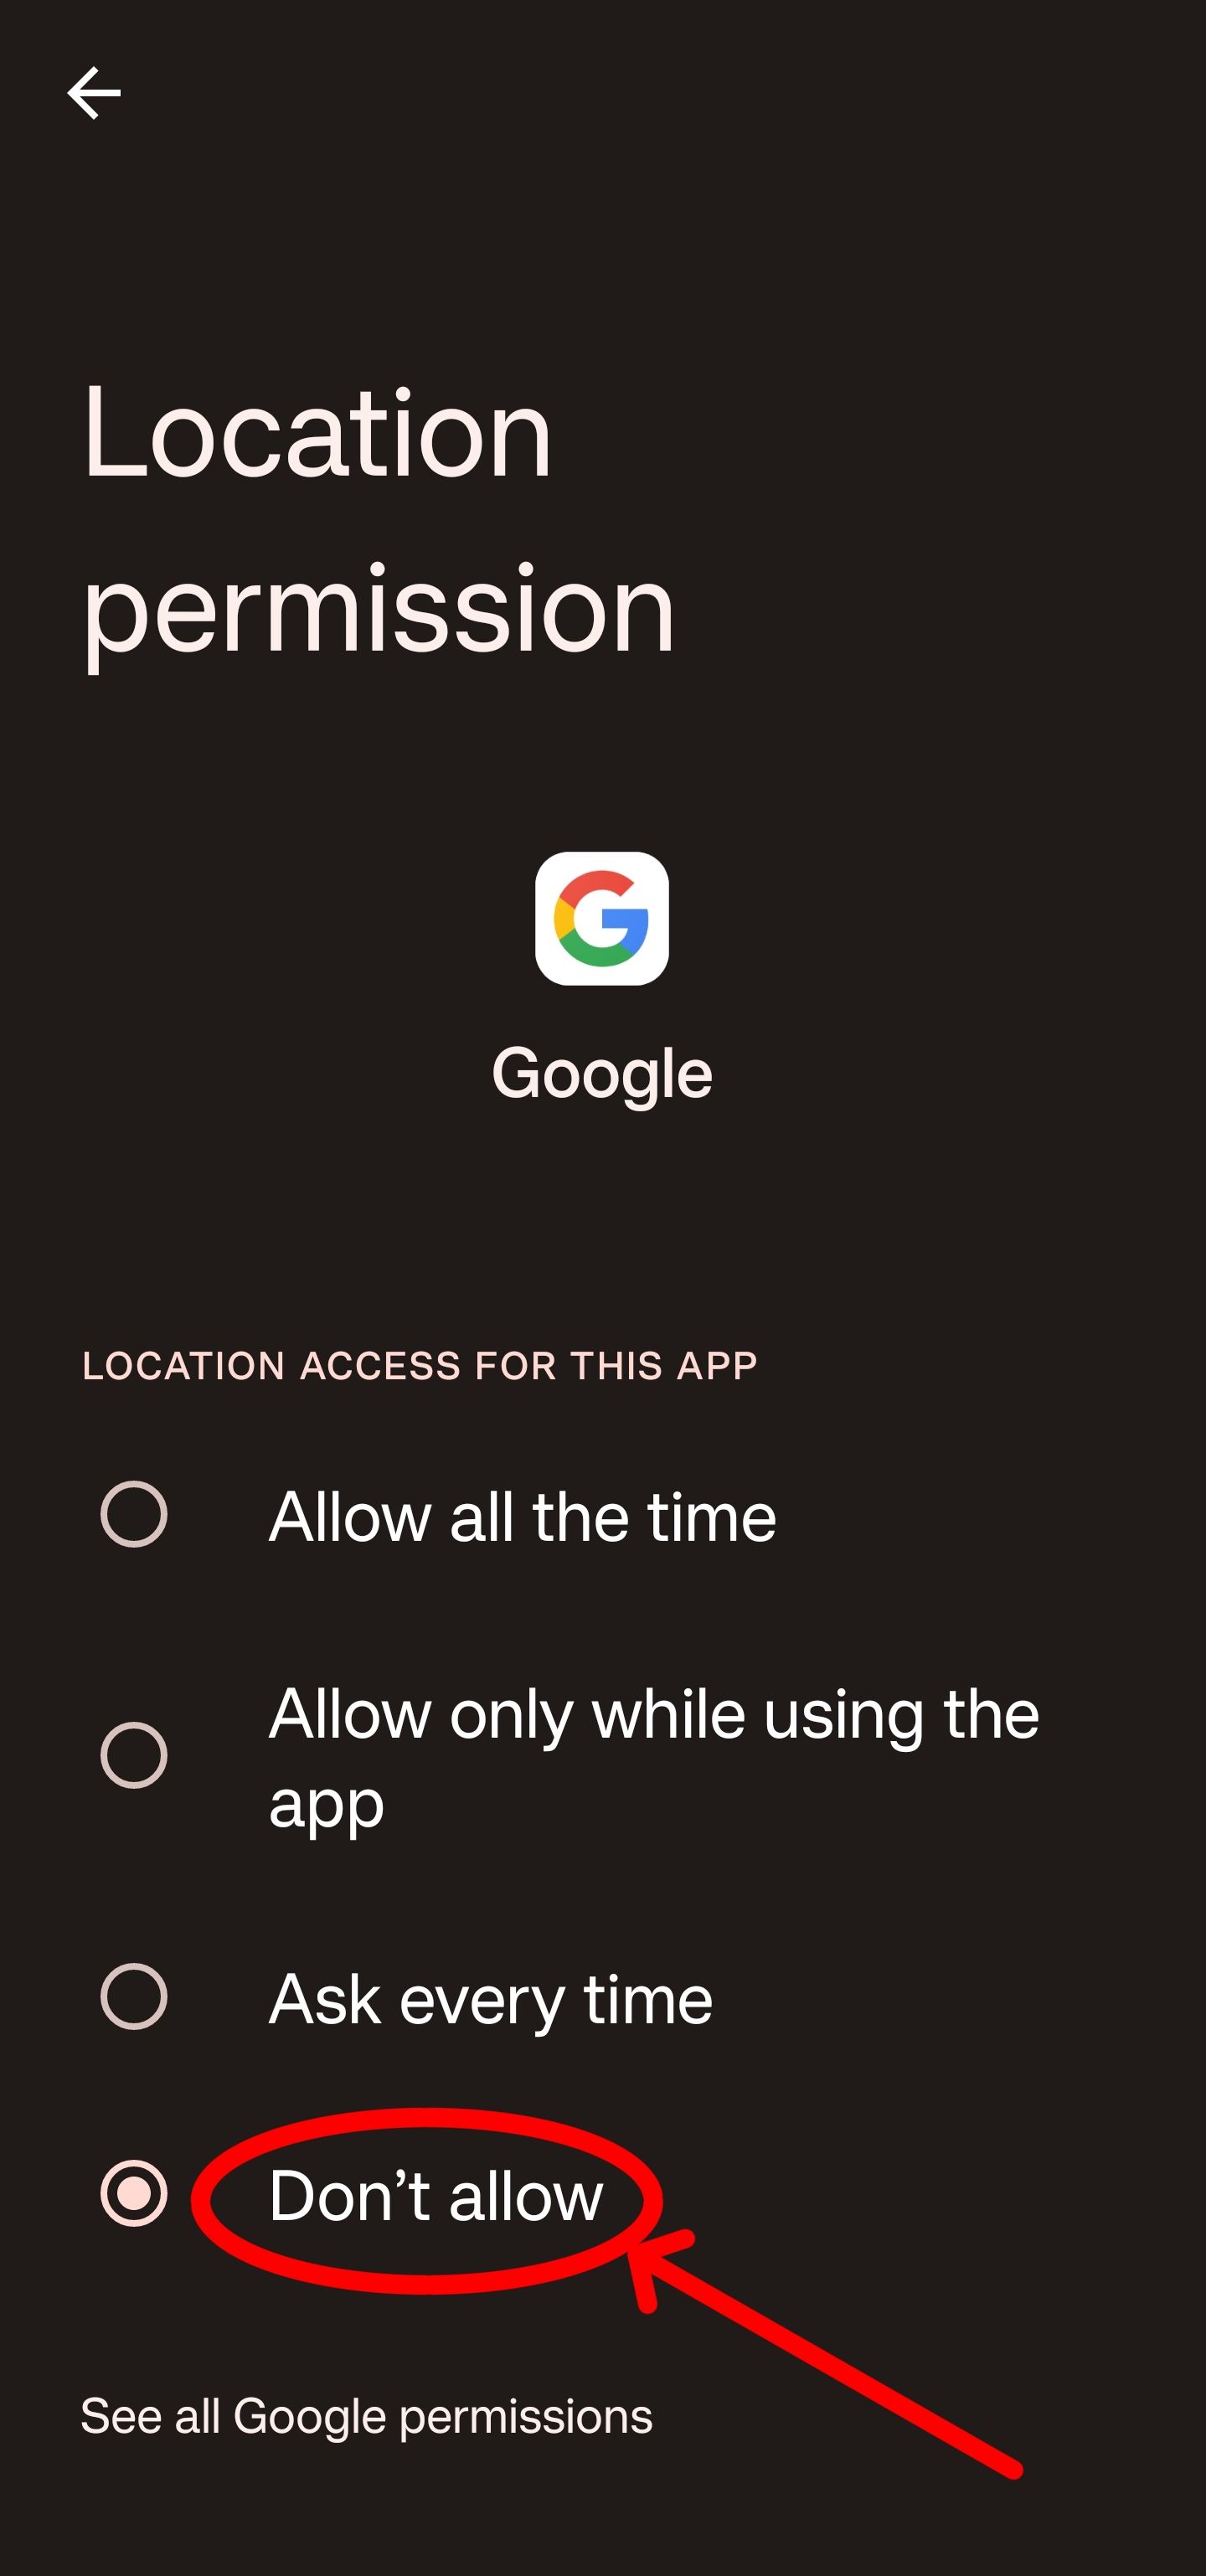 Select don't allow to disable the app's location permissions.